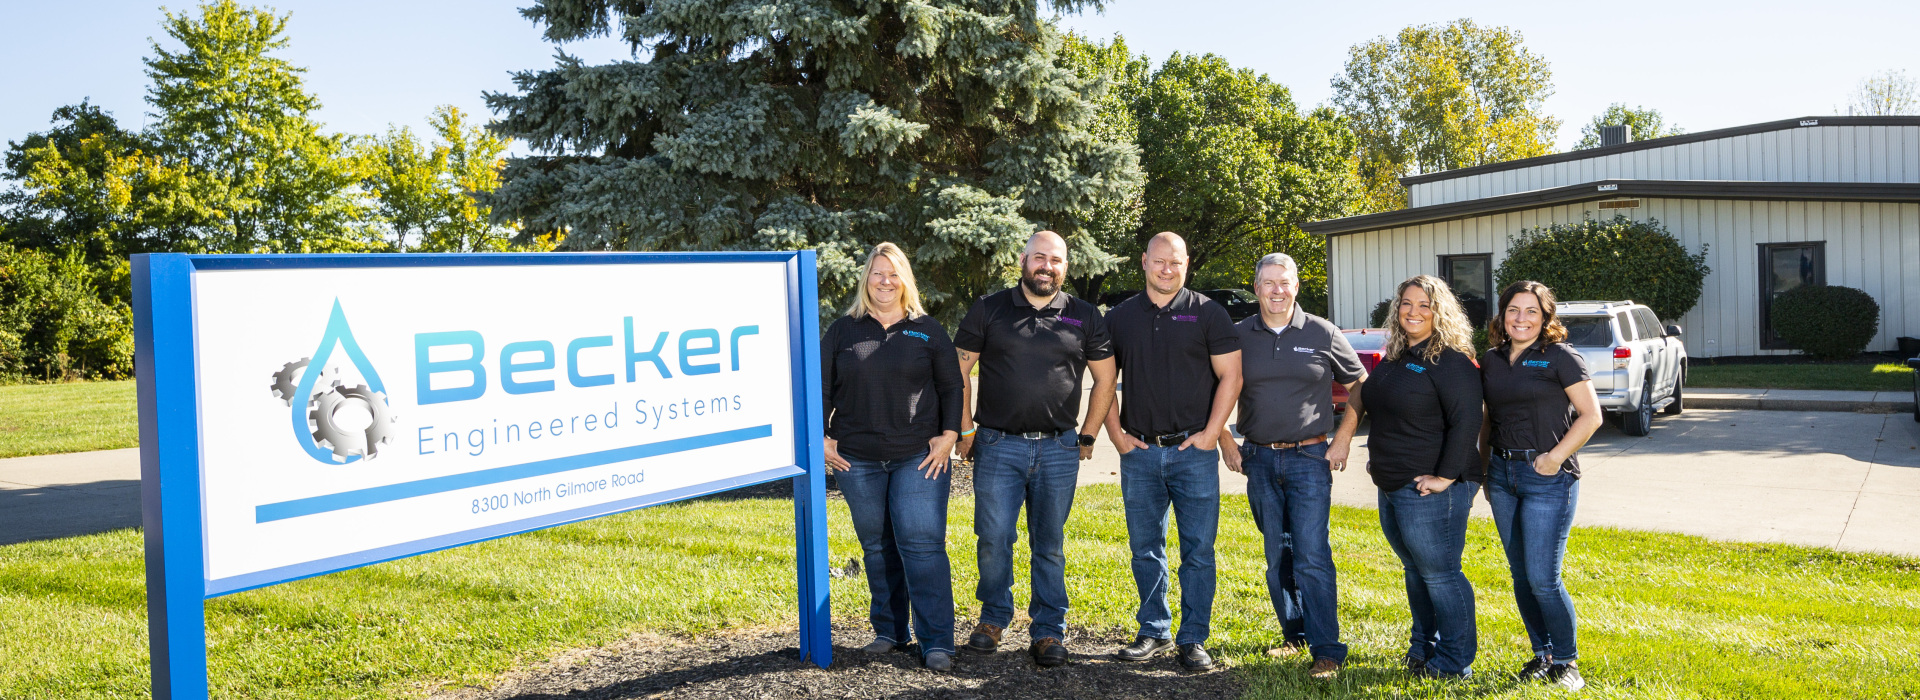 Becker staff standing outside next to the company sign